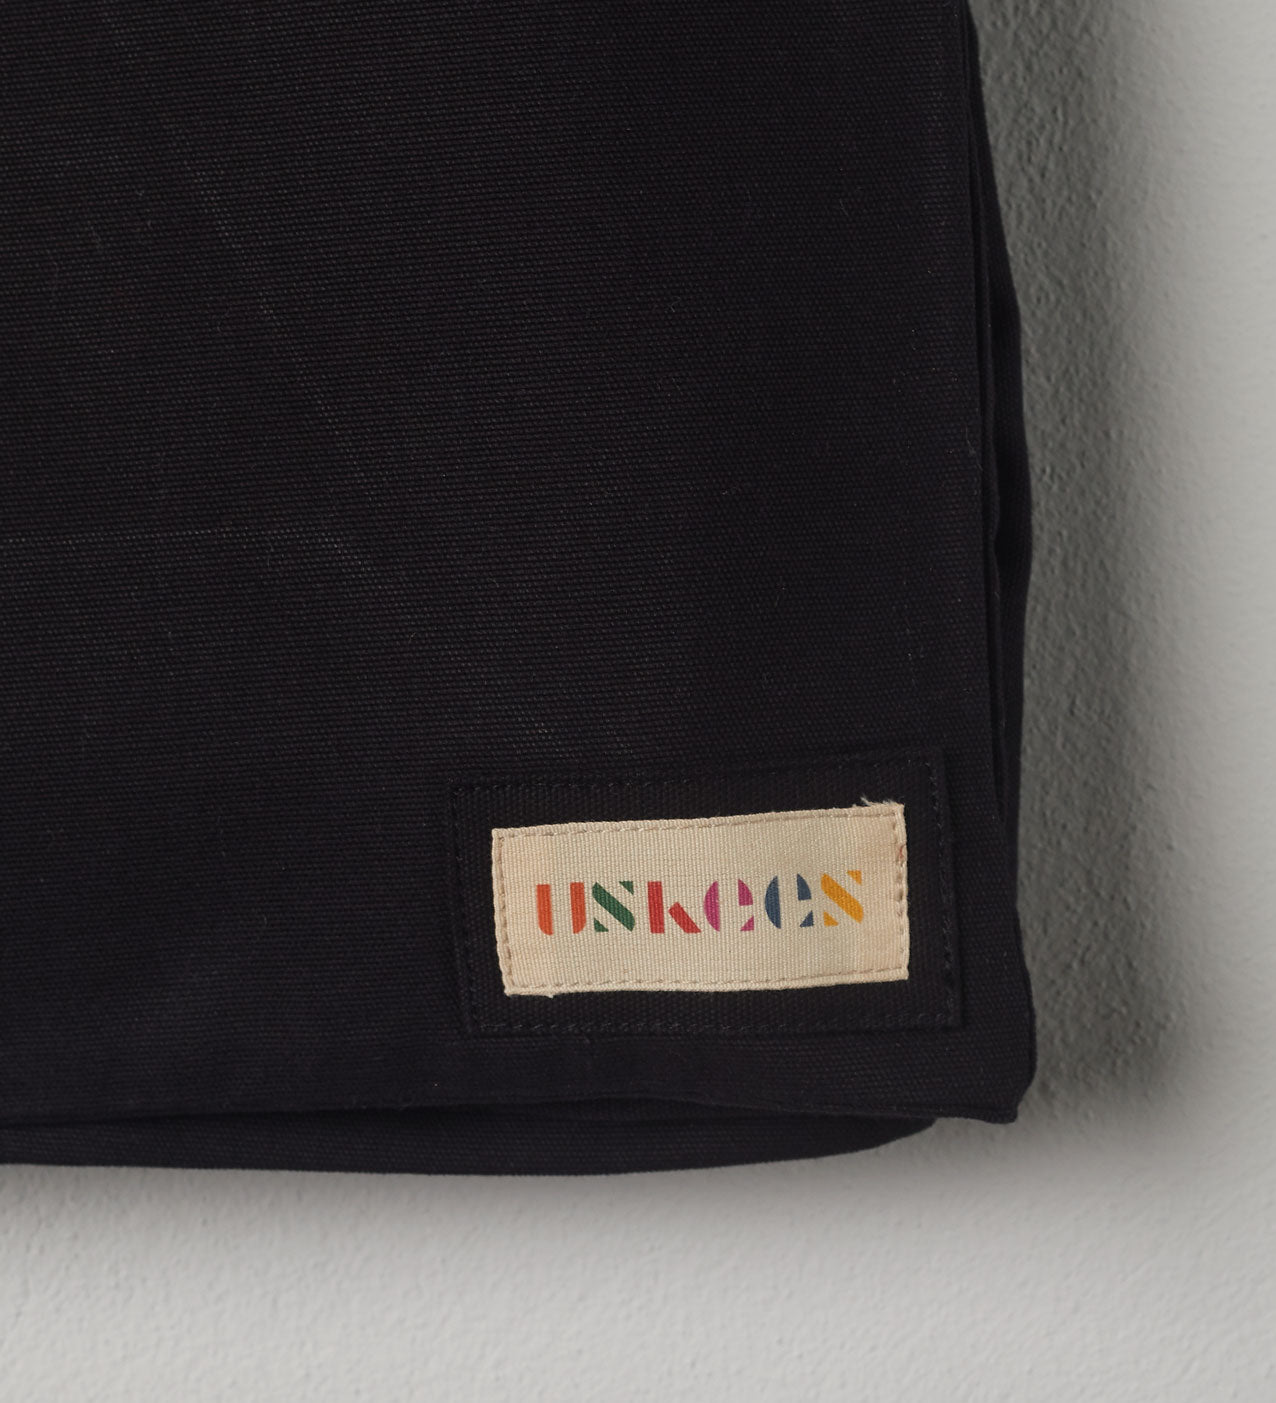 Close-up view of Uskees #4001 large tote bag in black showing the Uskees woven label.